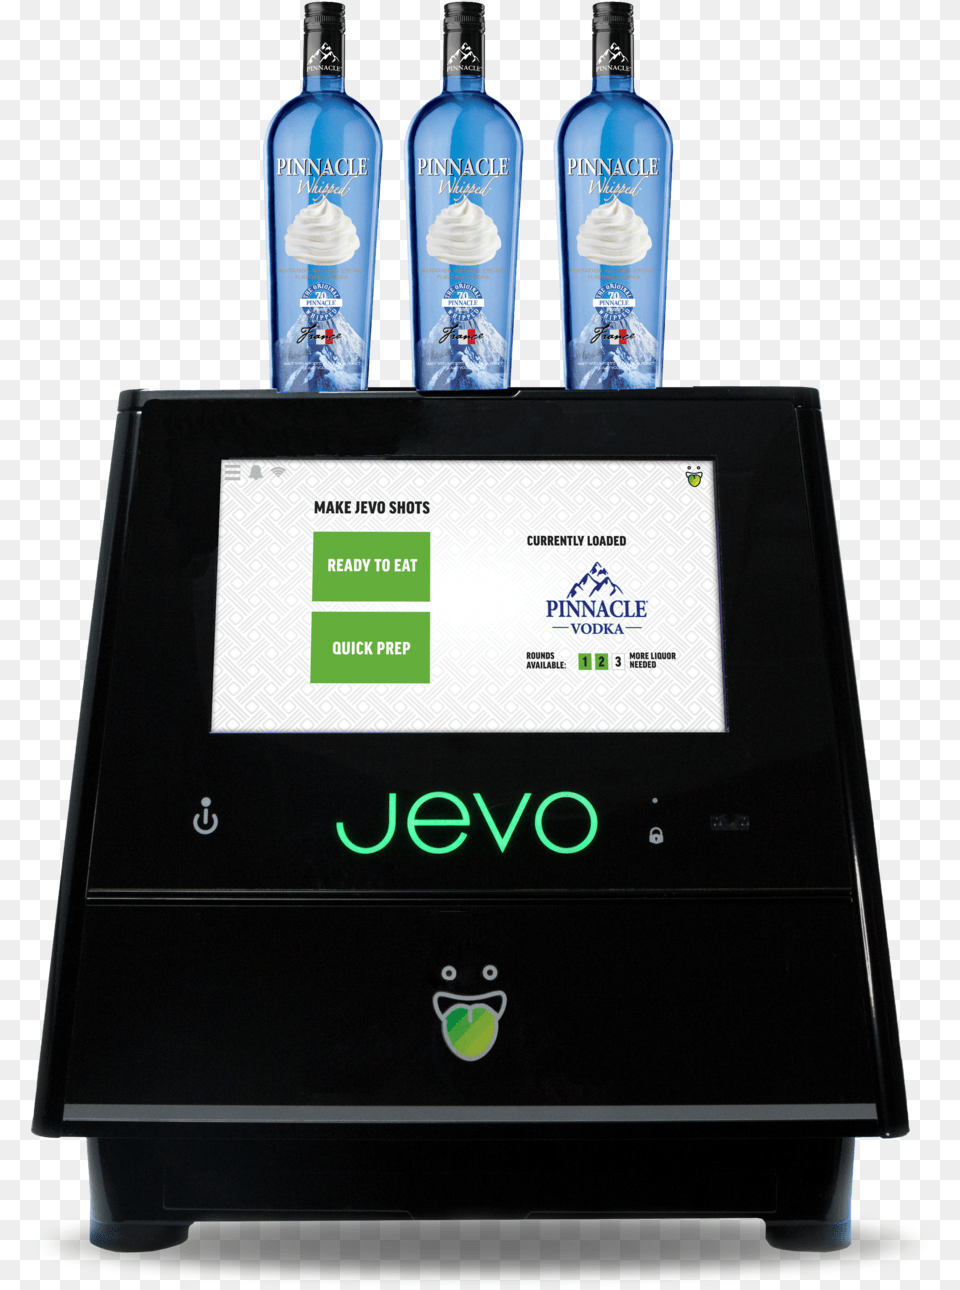 Download Jello With No Mirto, Bottle, Computer Hardware, Electronics, Hardware Png Image